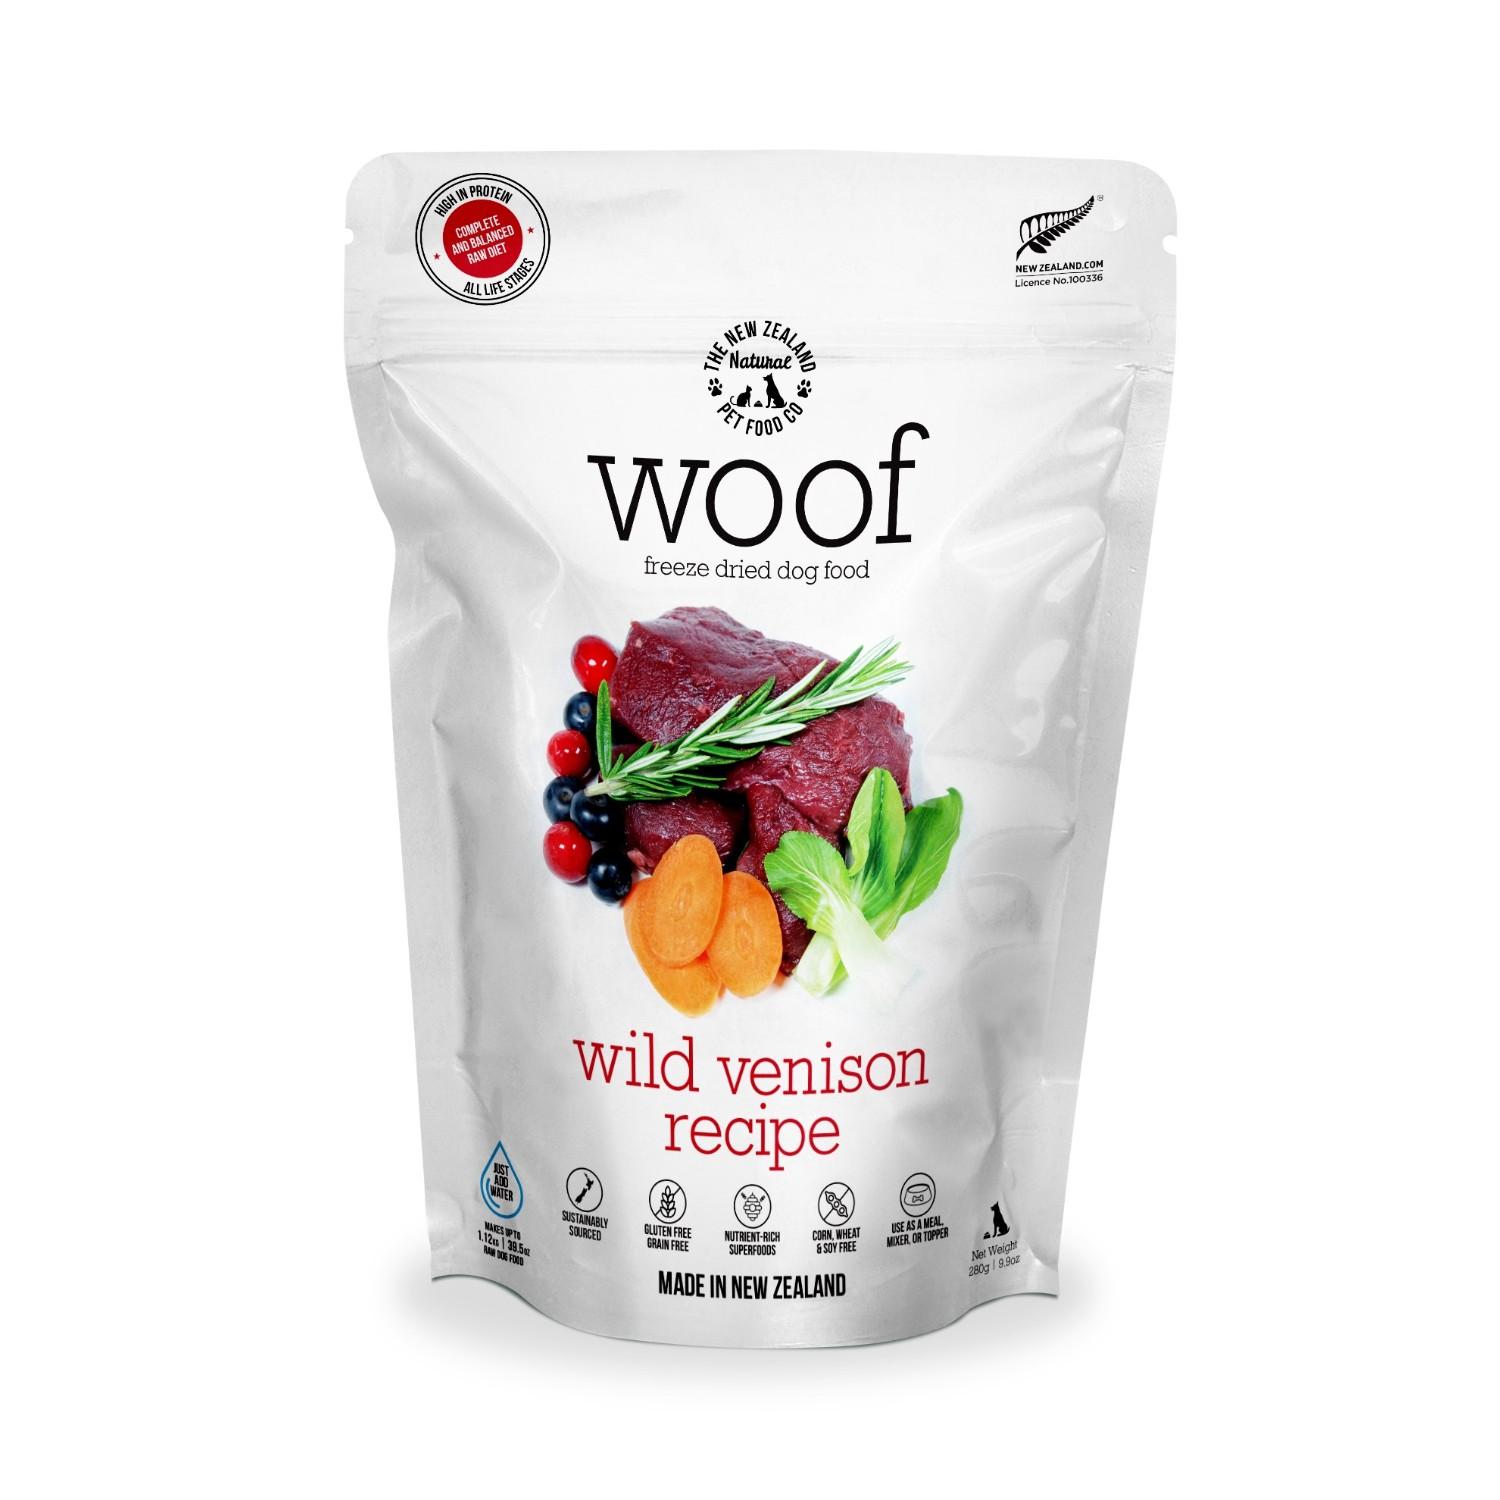 The New Zealand Natural Pet Food Co. Woof Freeze Dried Dog Food - Wild Venison